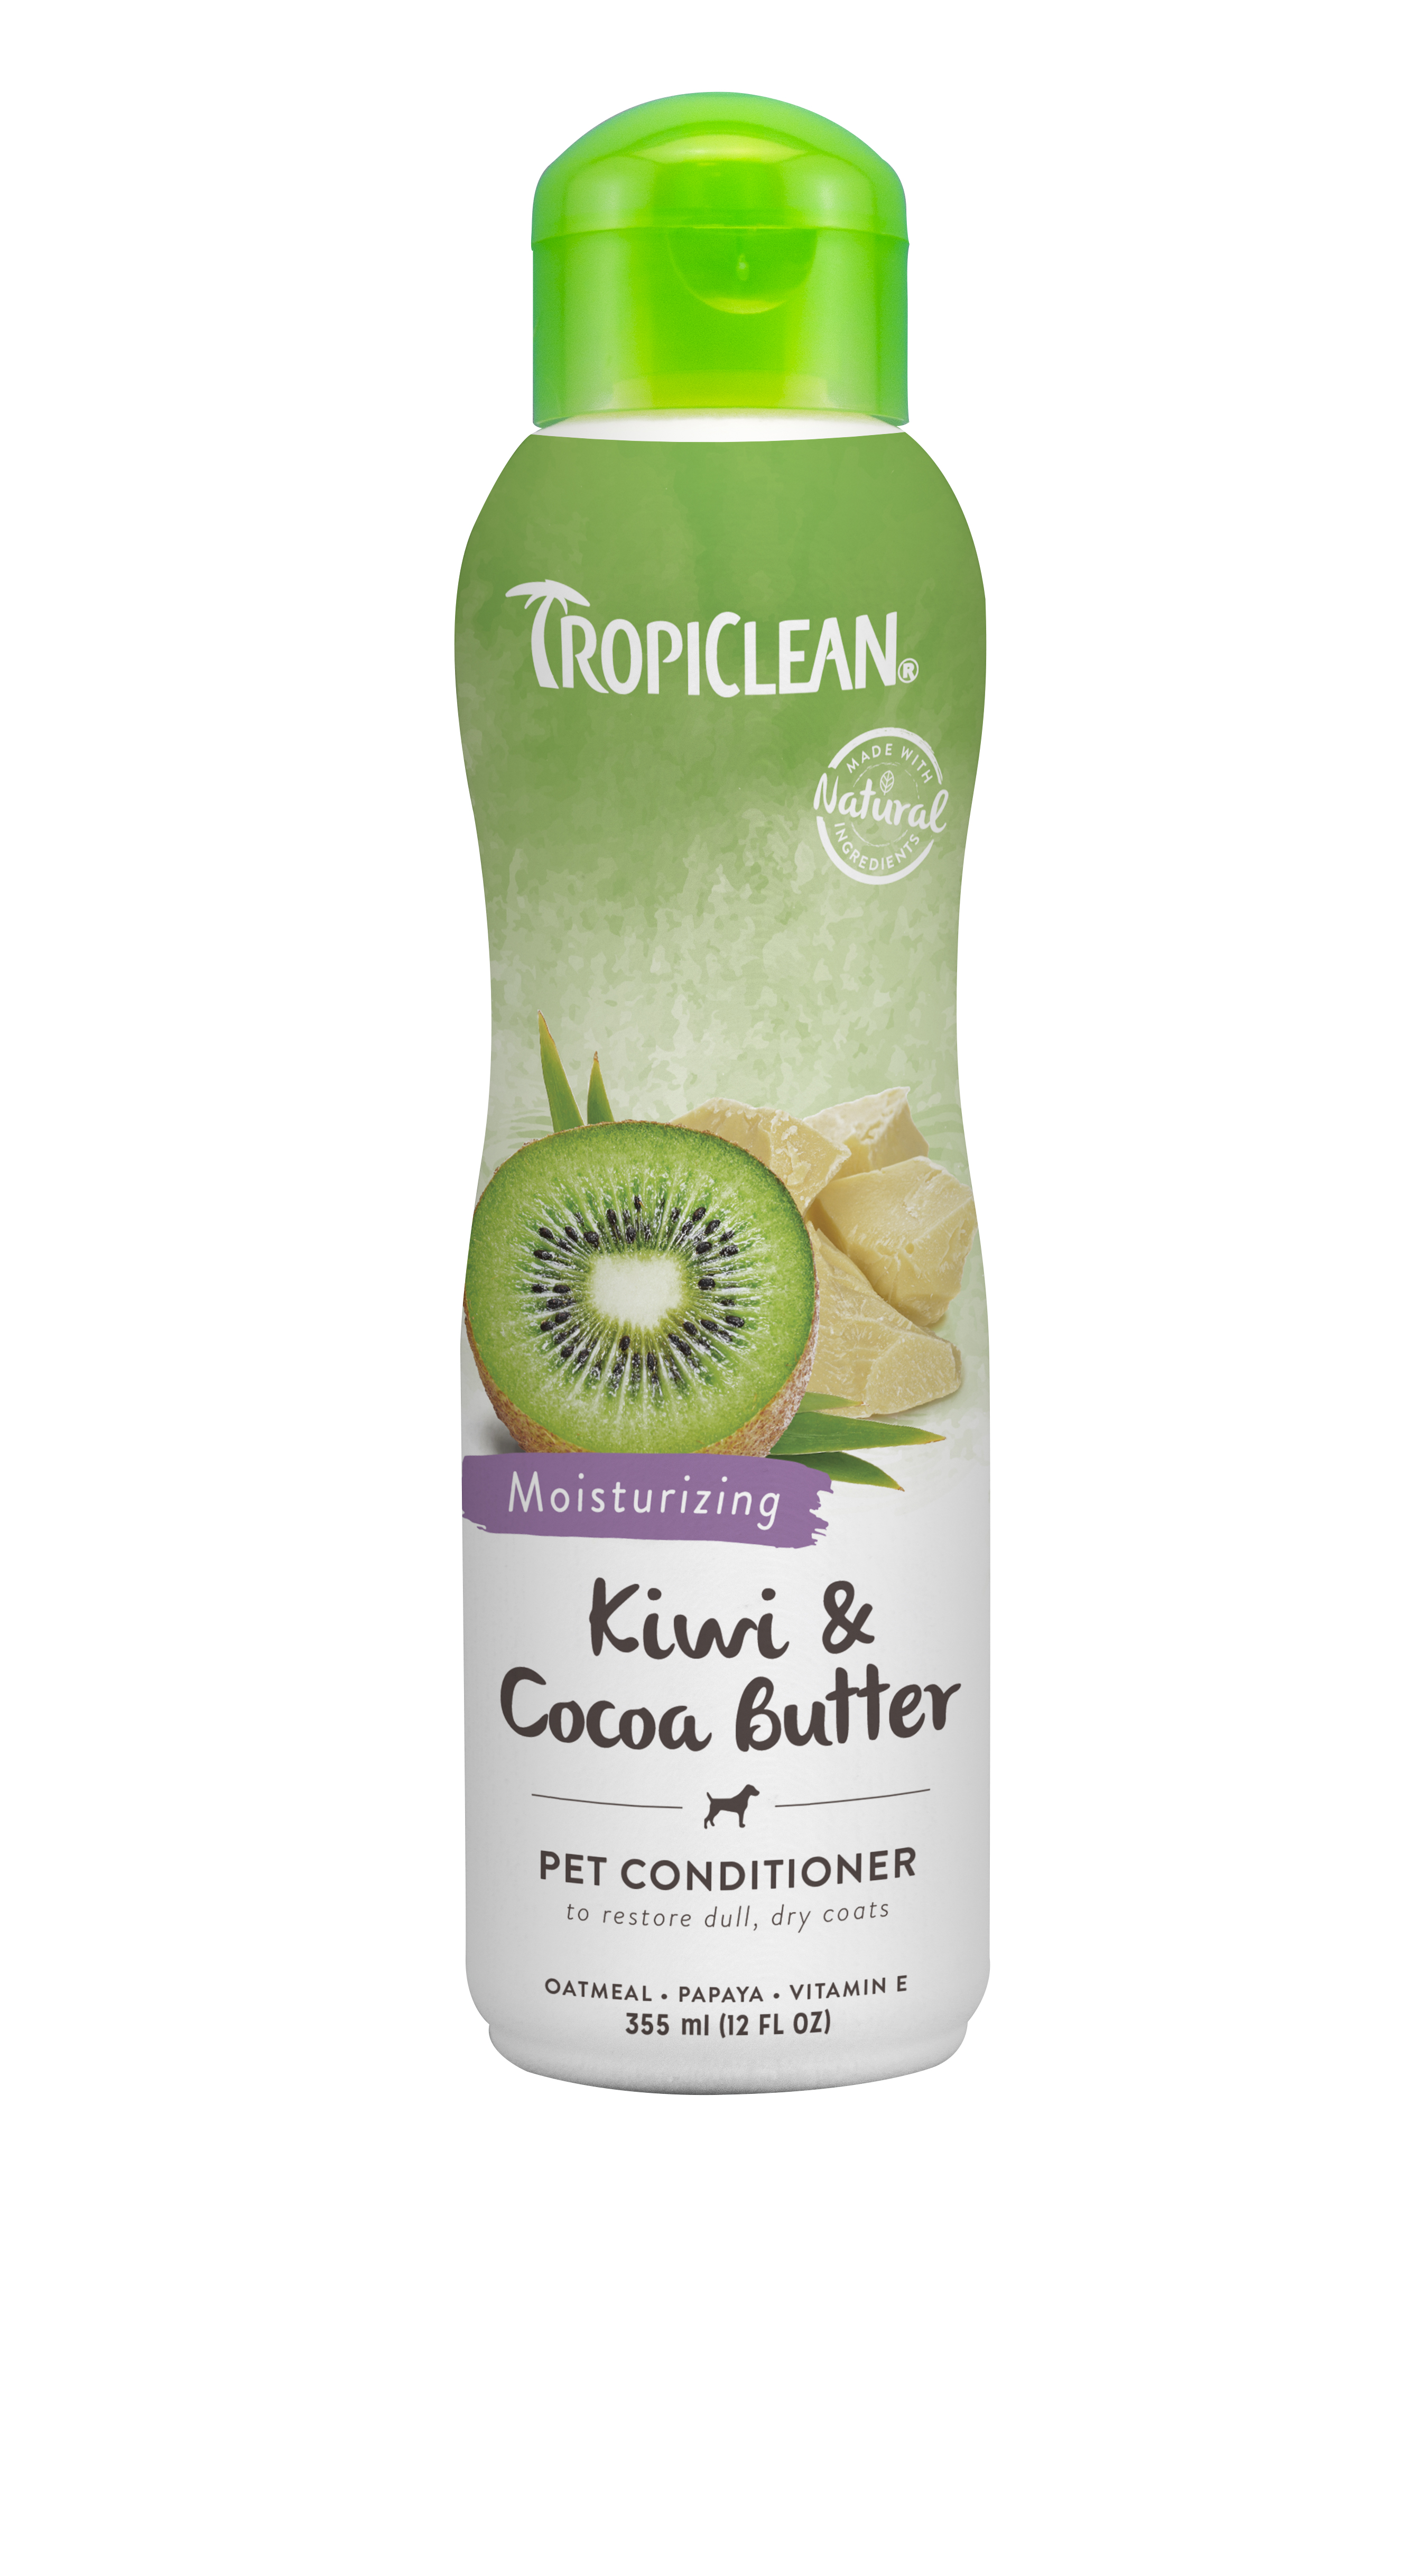 Tropiclean Kiwi and Cocoa Butter Conditioner (Moisturizing)